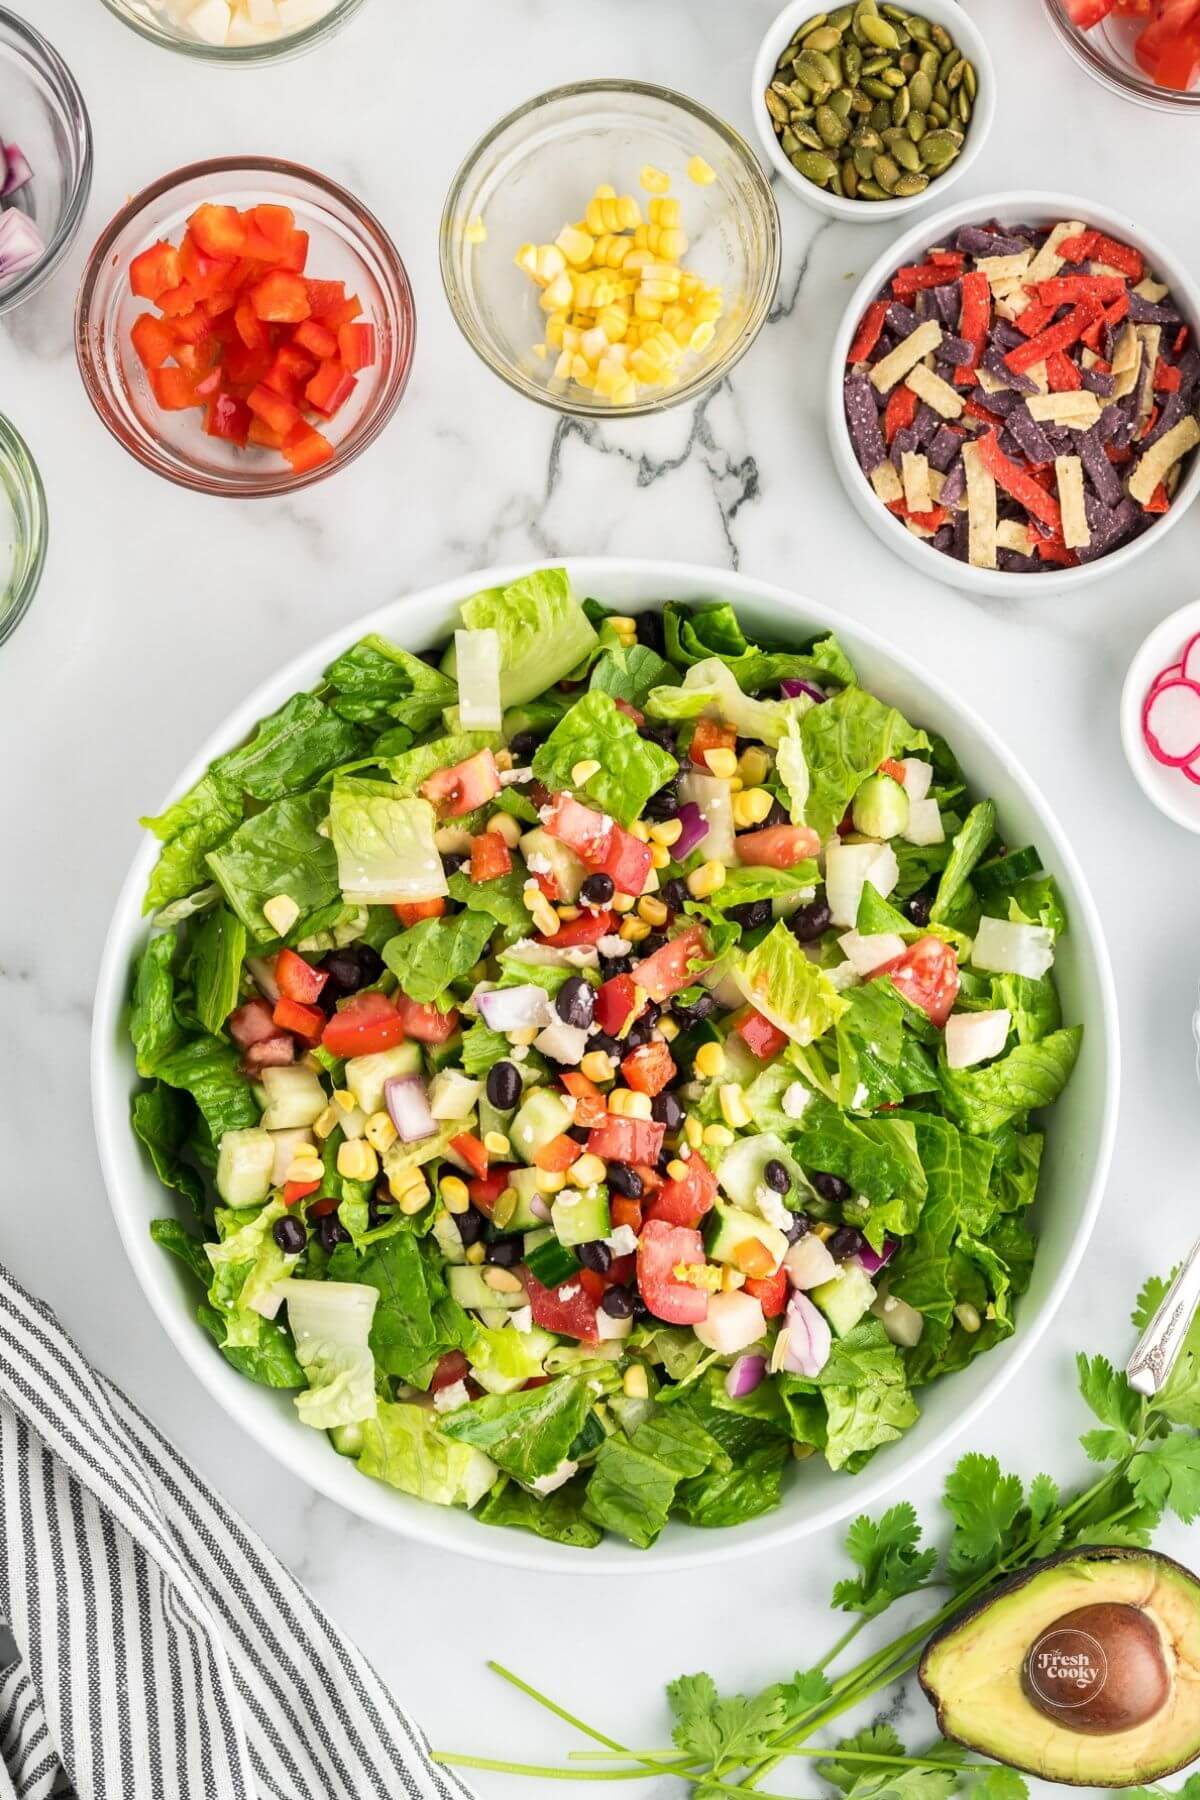 Tossed healthy Mexican chopped salad in large bowl.